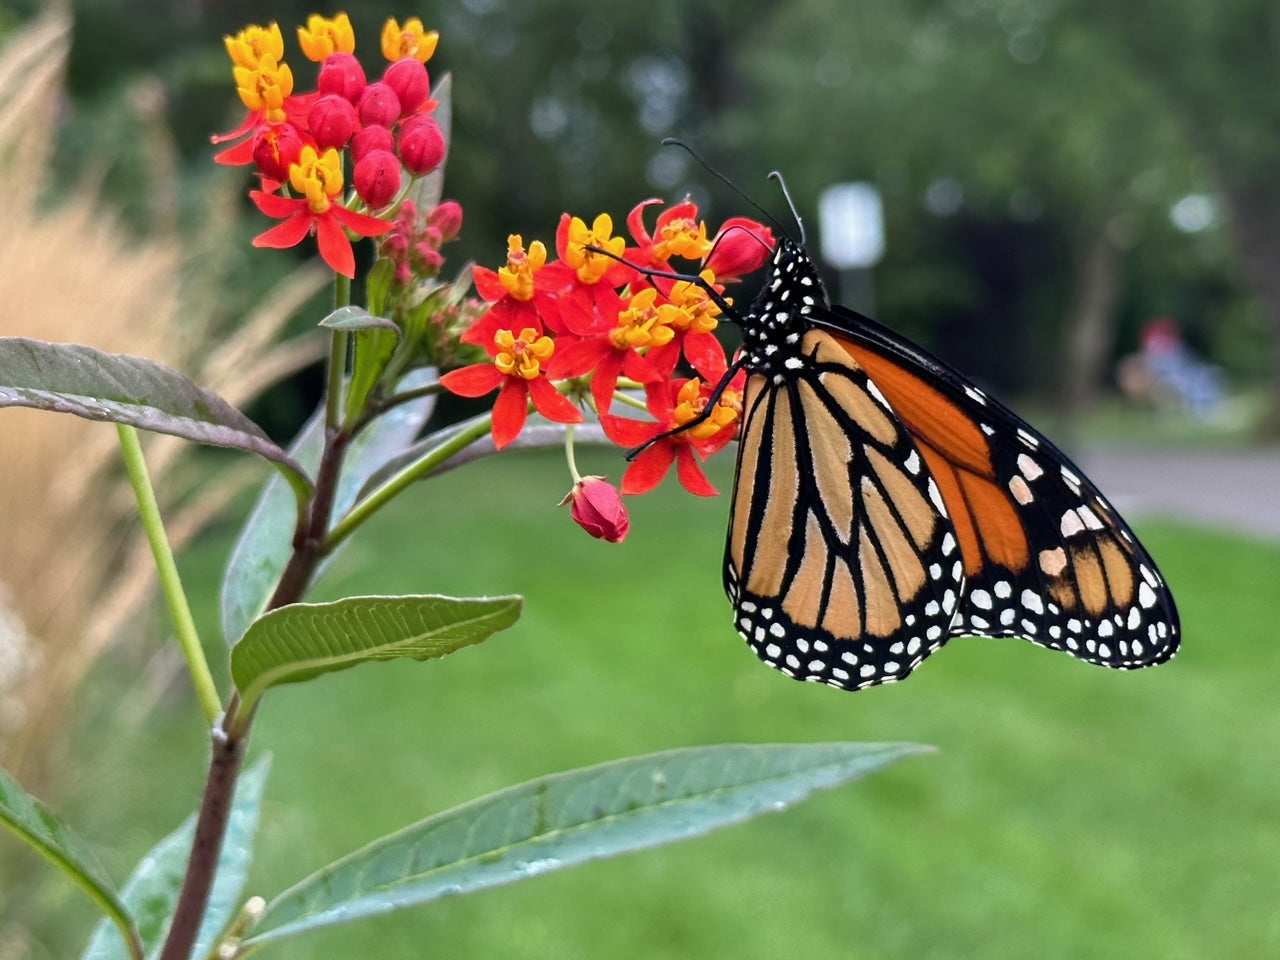 The Monarch Butterfly migration from Mexico to Canada; a return trip for the multi generational Butterfly